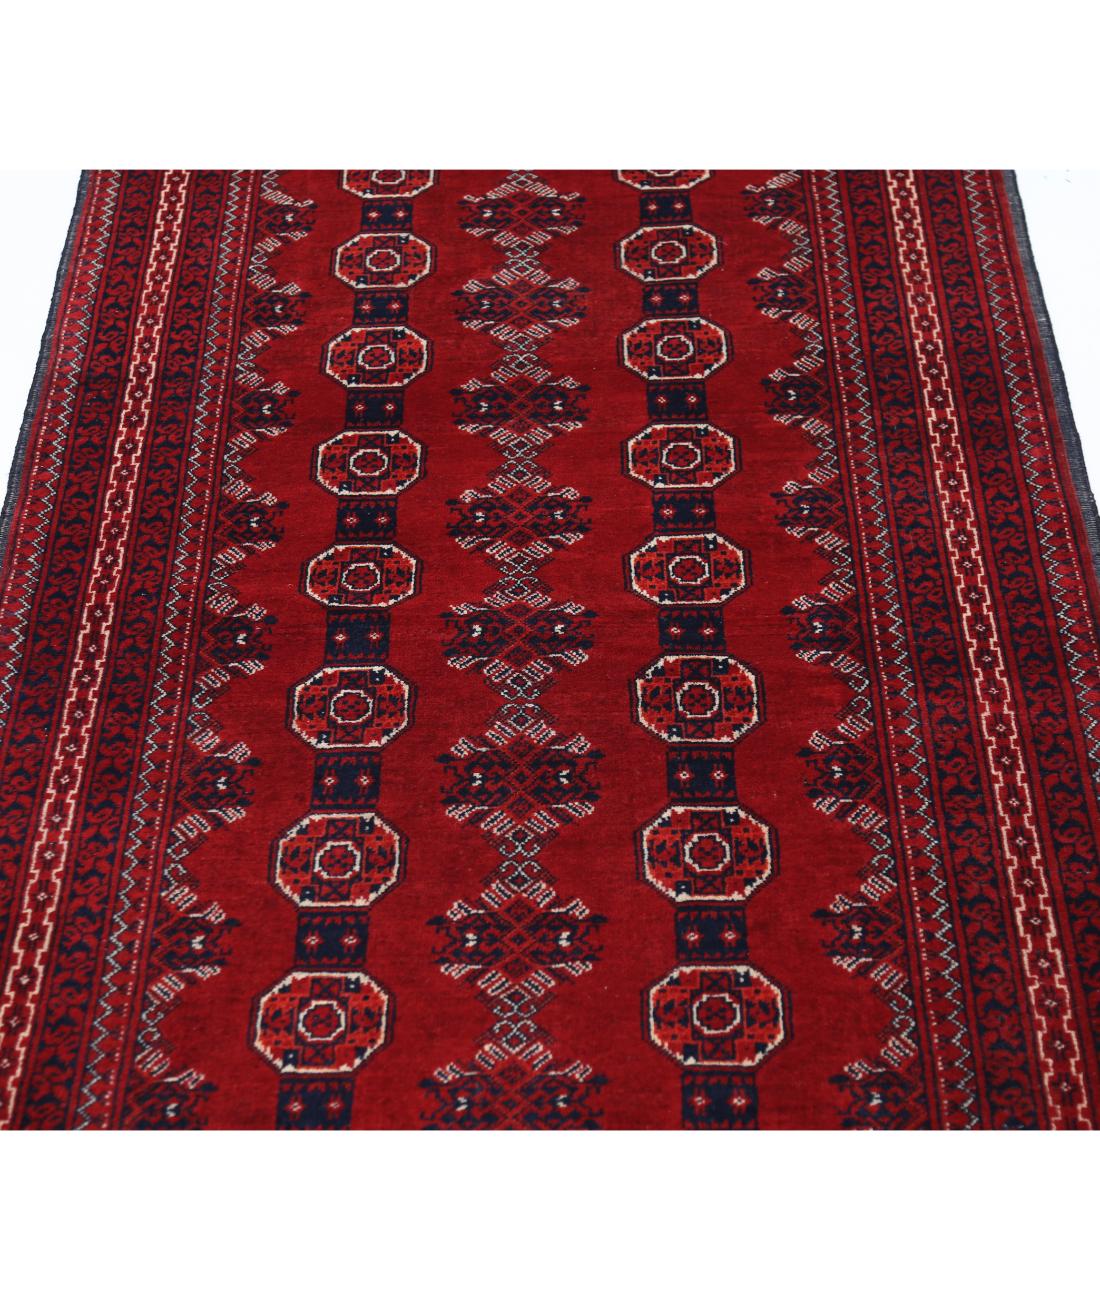 Hand Knotted Afghan Usmania Wool Rug - 2'10'' x 11'9'' 2' 10" X 11' 9" (86 X 358) / Red / Blue